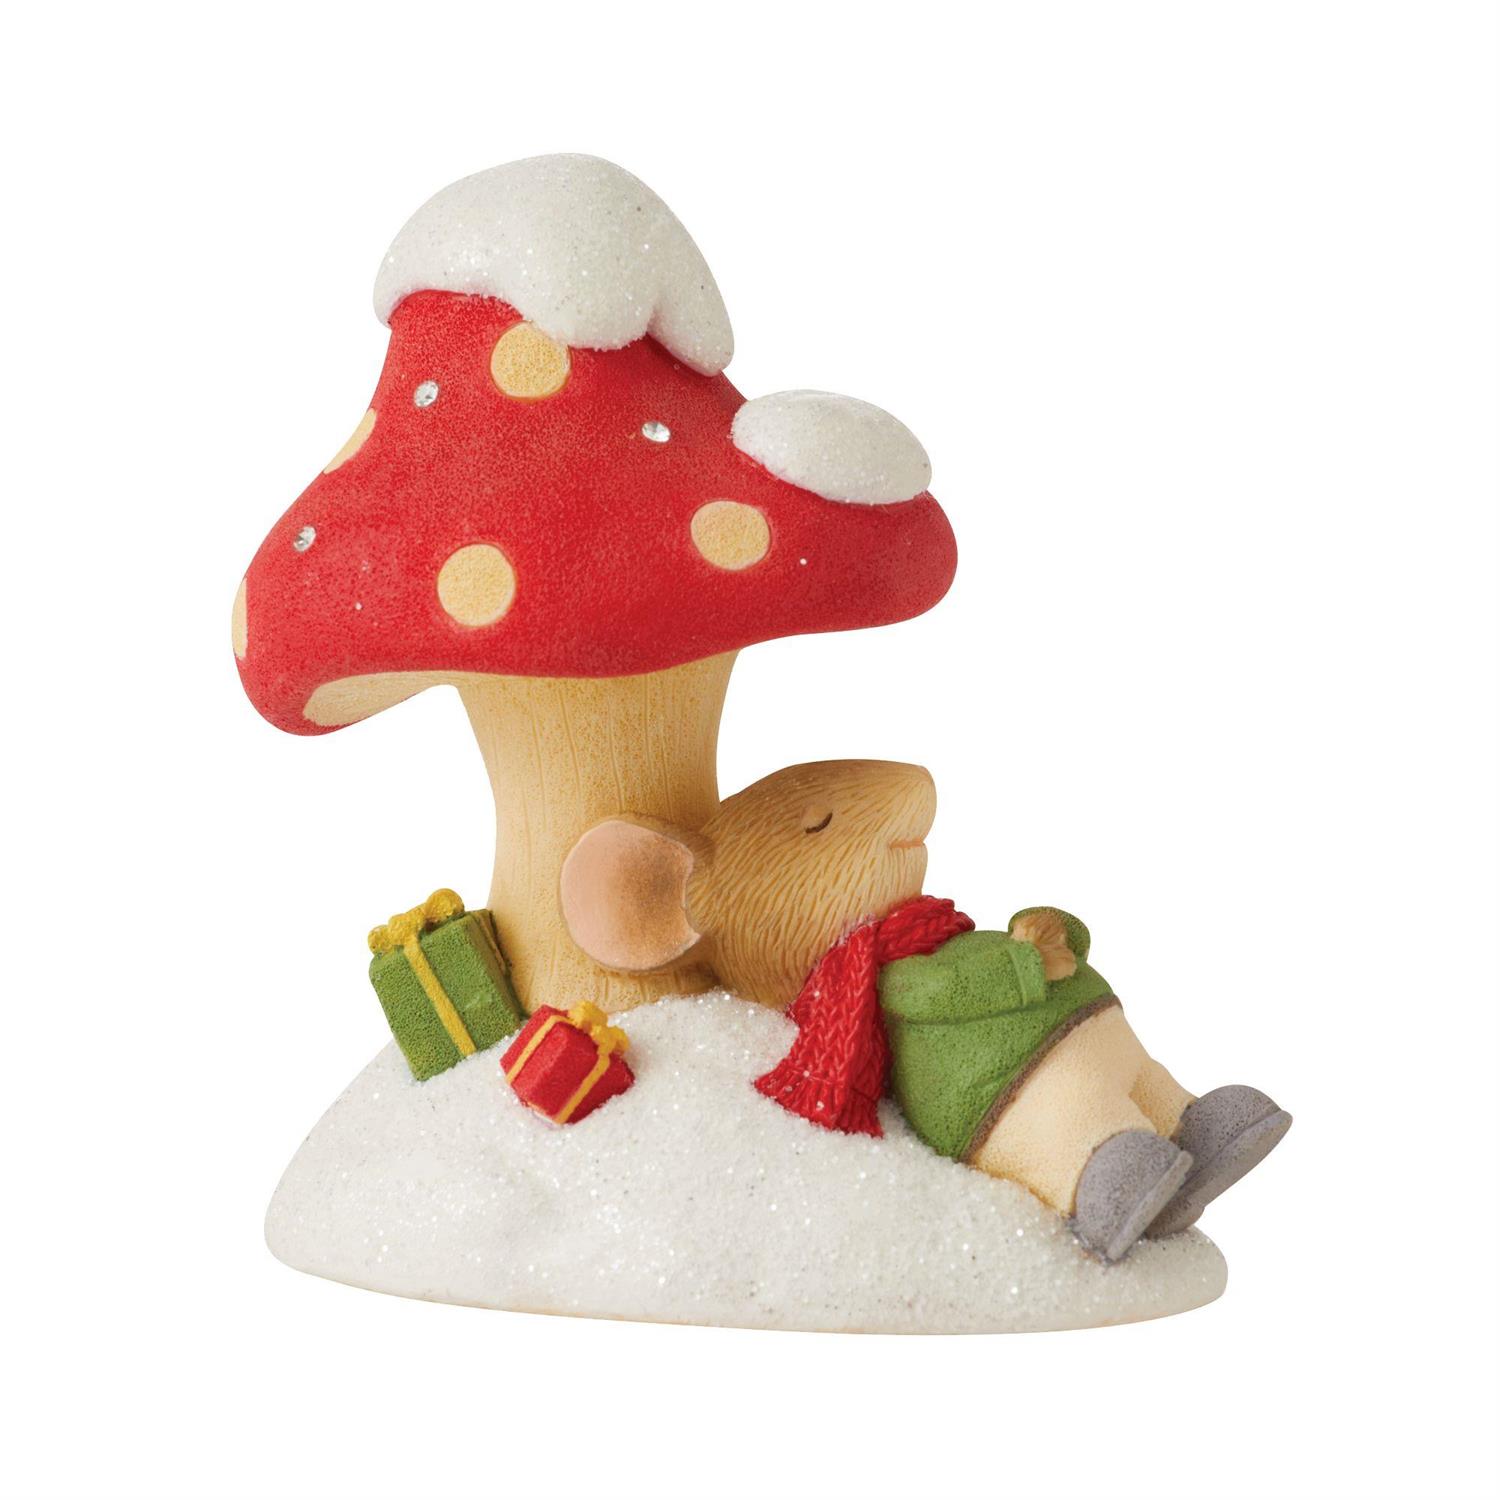 Enesco Gifts Karen Hahn Tails With Heart Heart Of Christmas Napping Under The Shroom Figurine Free Shipping Iveys Gifts 